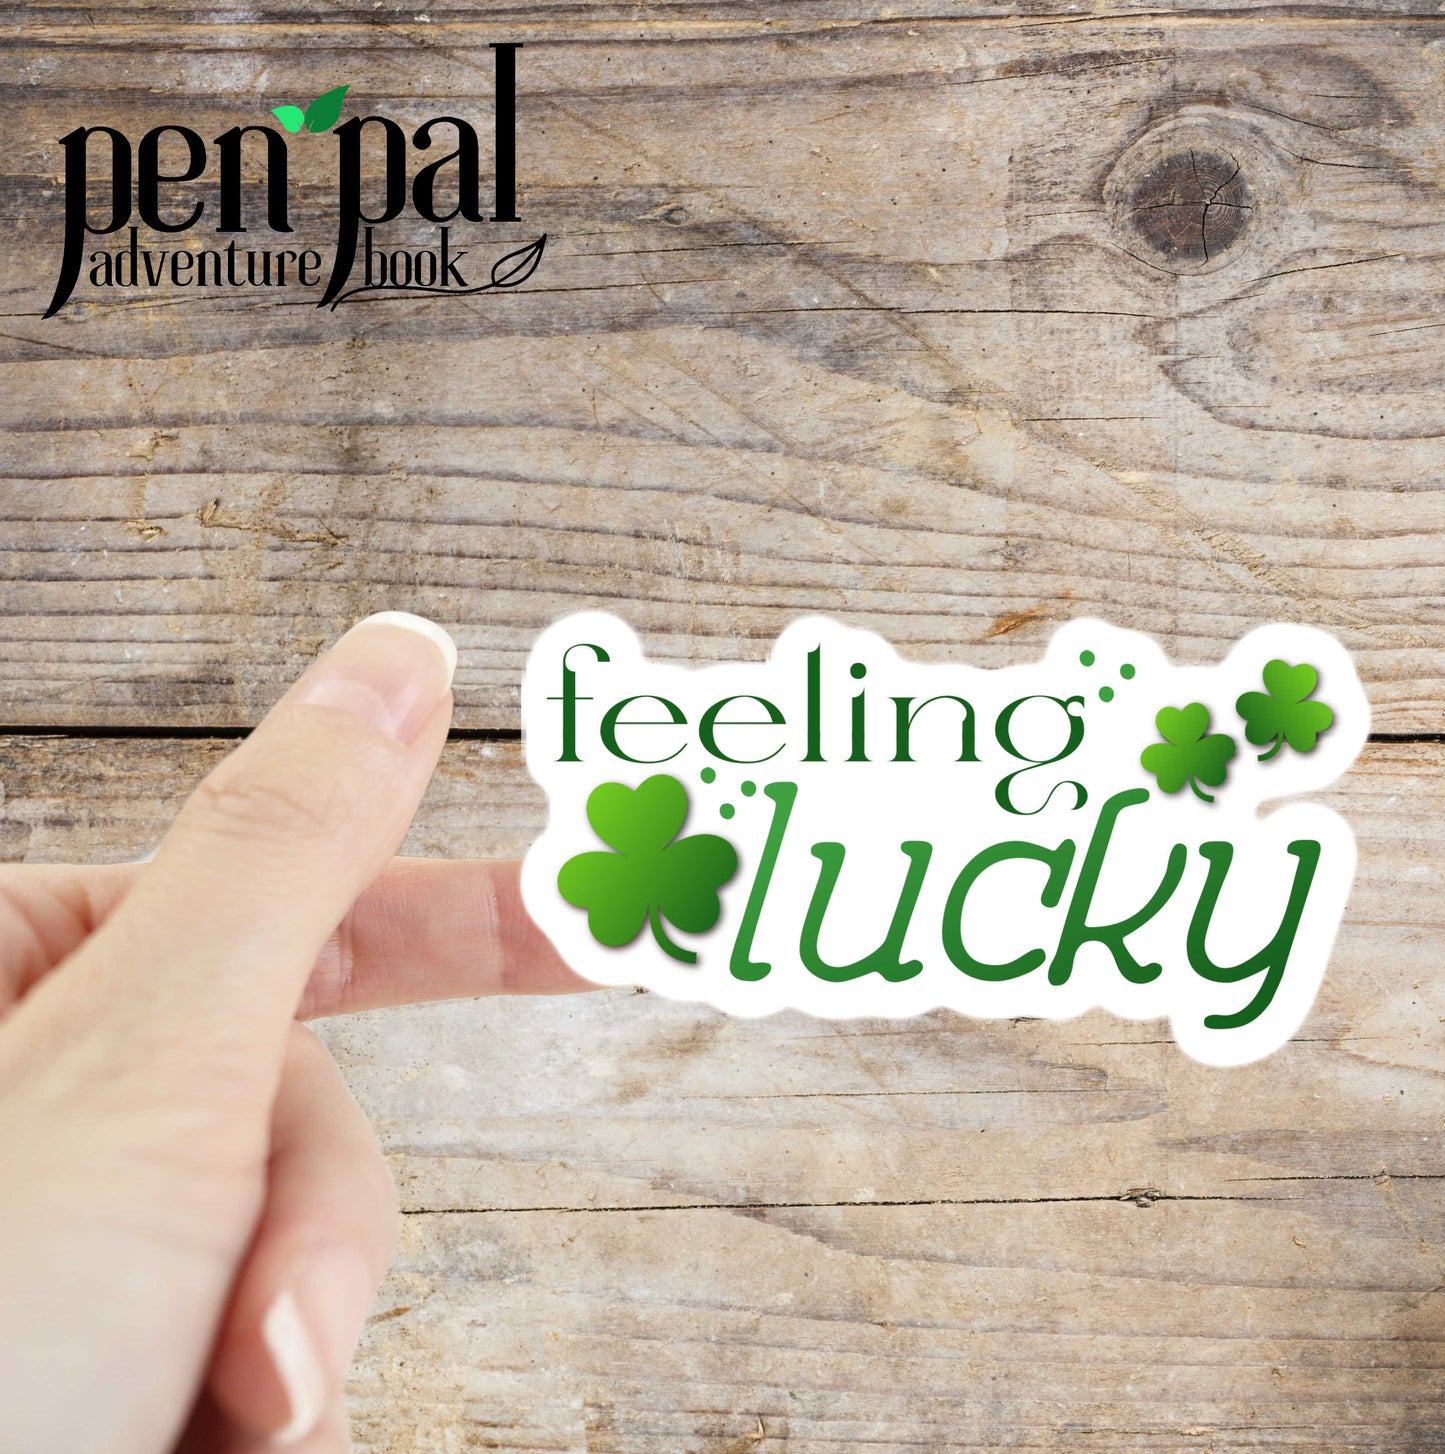 Instant Download-Feeling Lucky Clover Journal Layout-Pen Pal Adventure Book Coordinating Printables